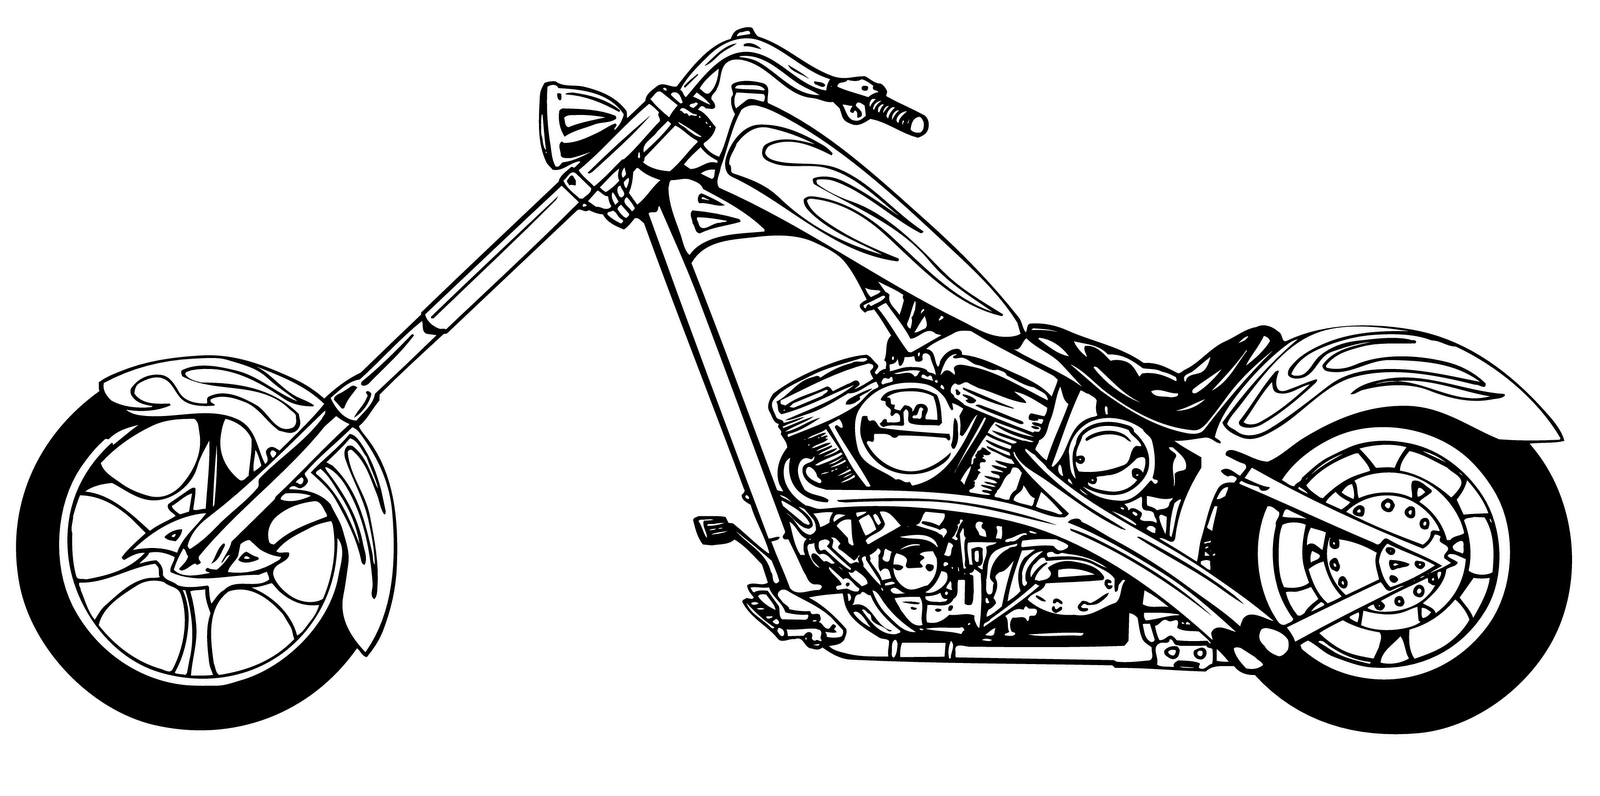 view all Black And White Motorcycle Art). 